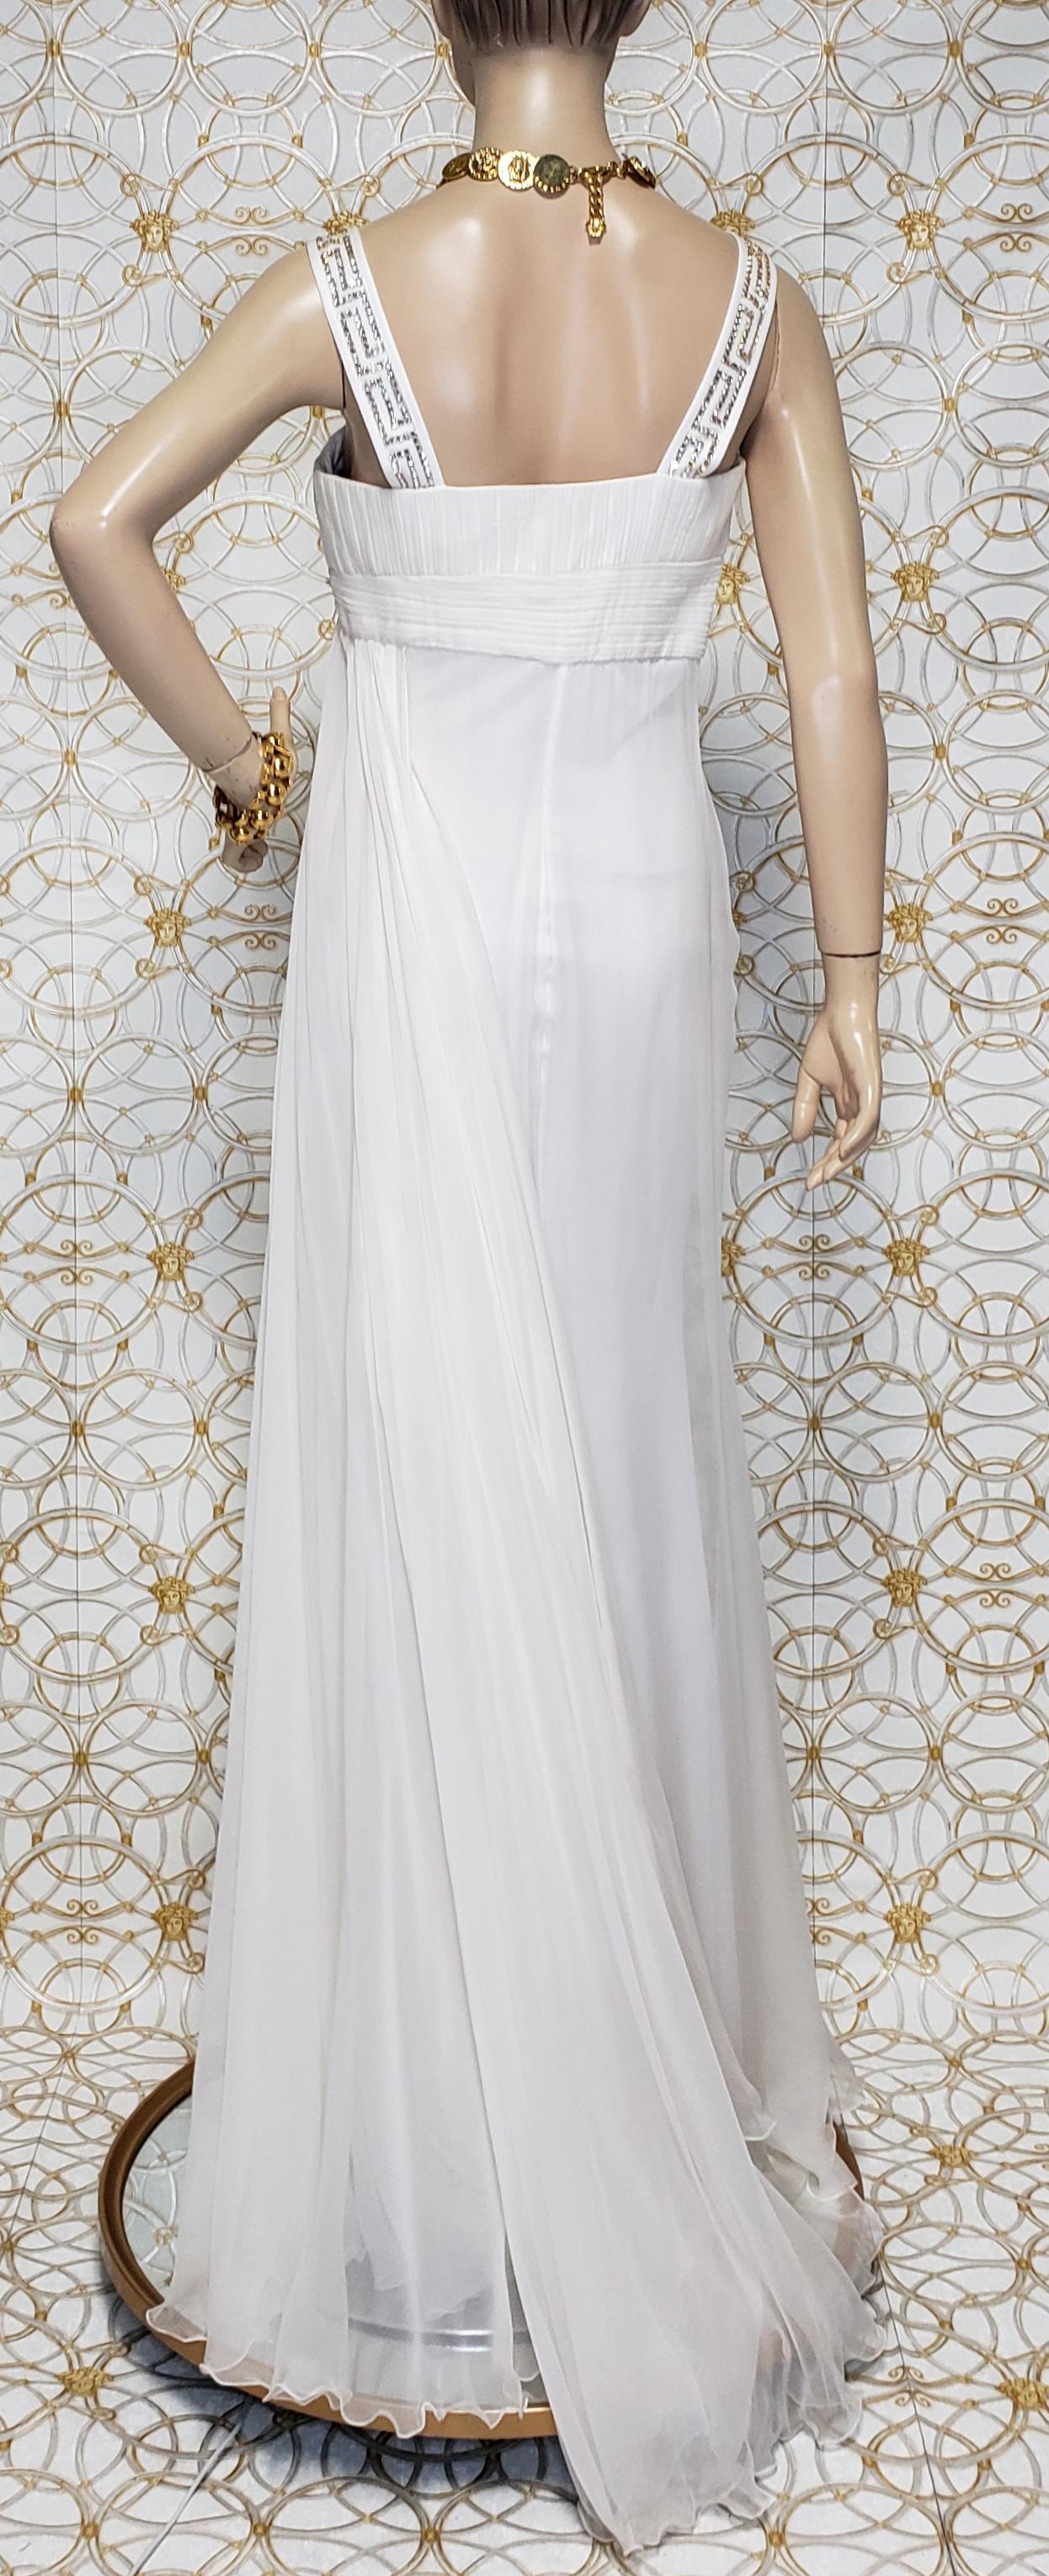 Women's New Versace Crystal Embellished White Silk Gown 44 - 8